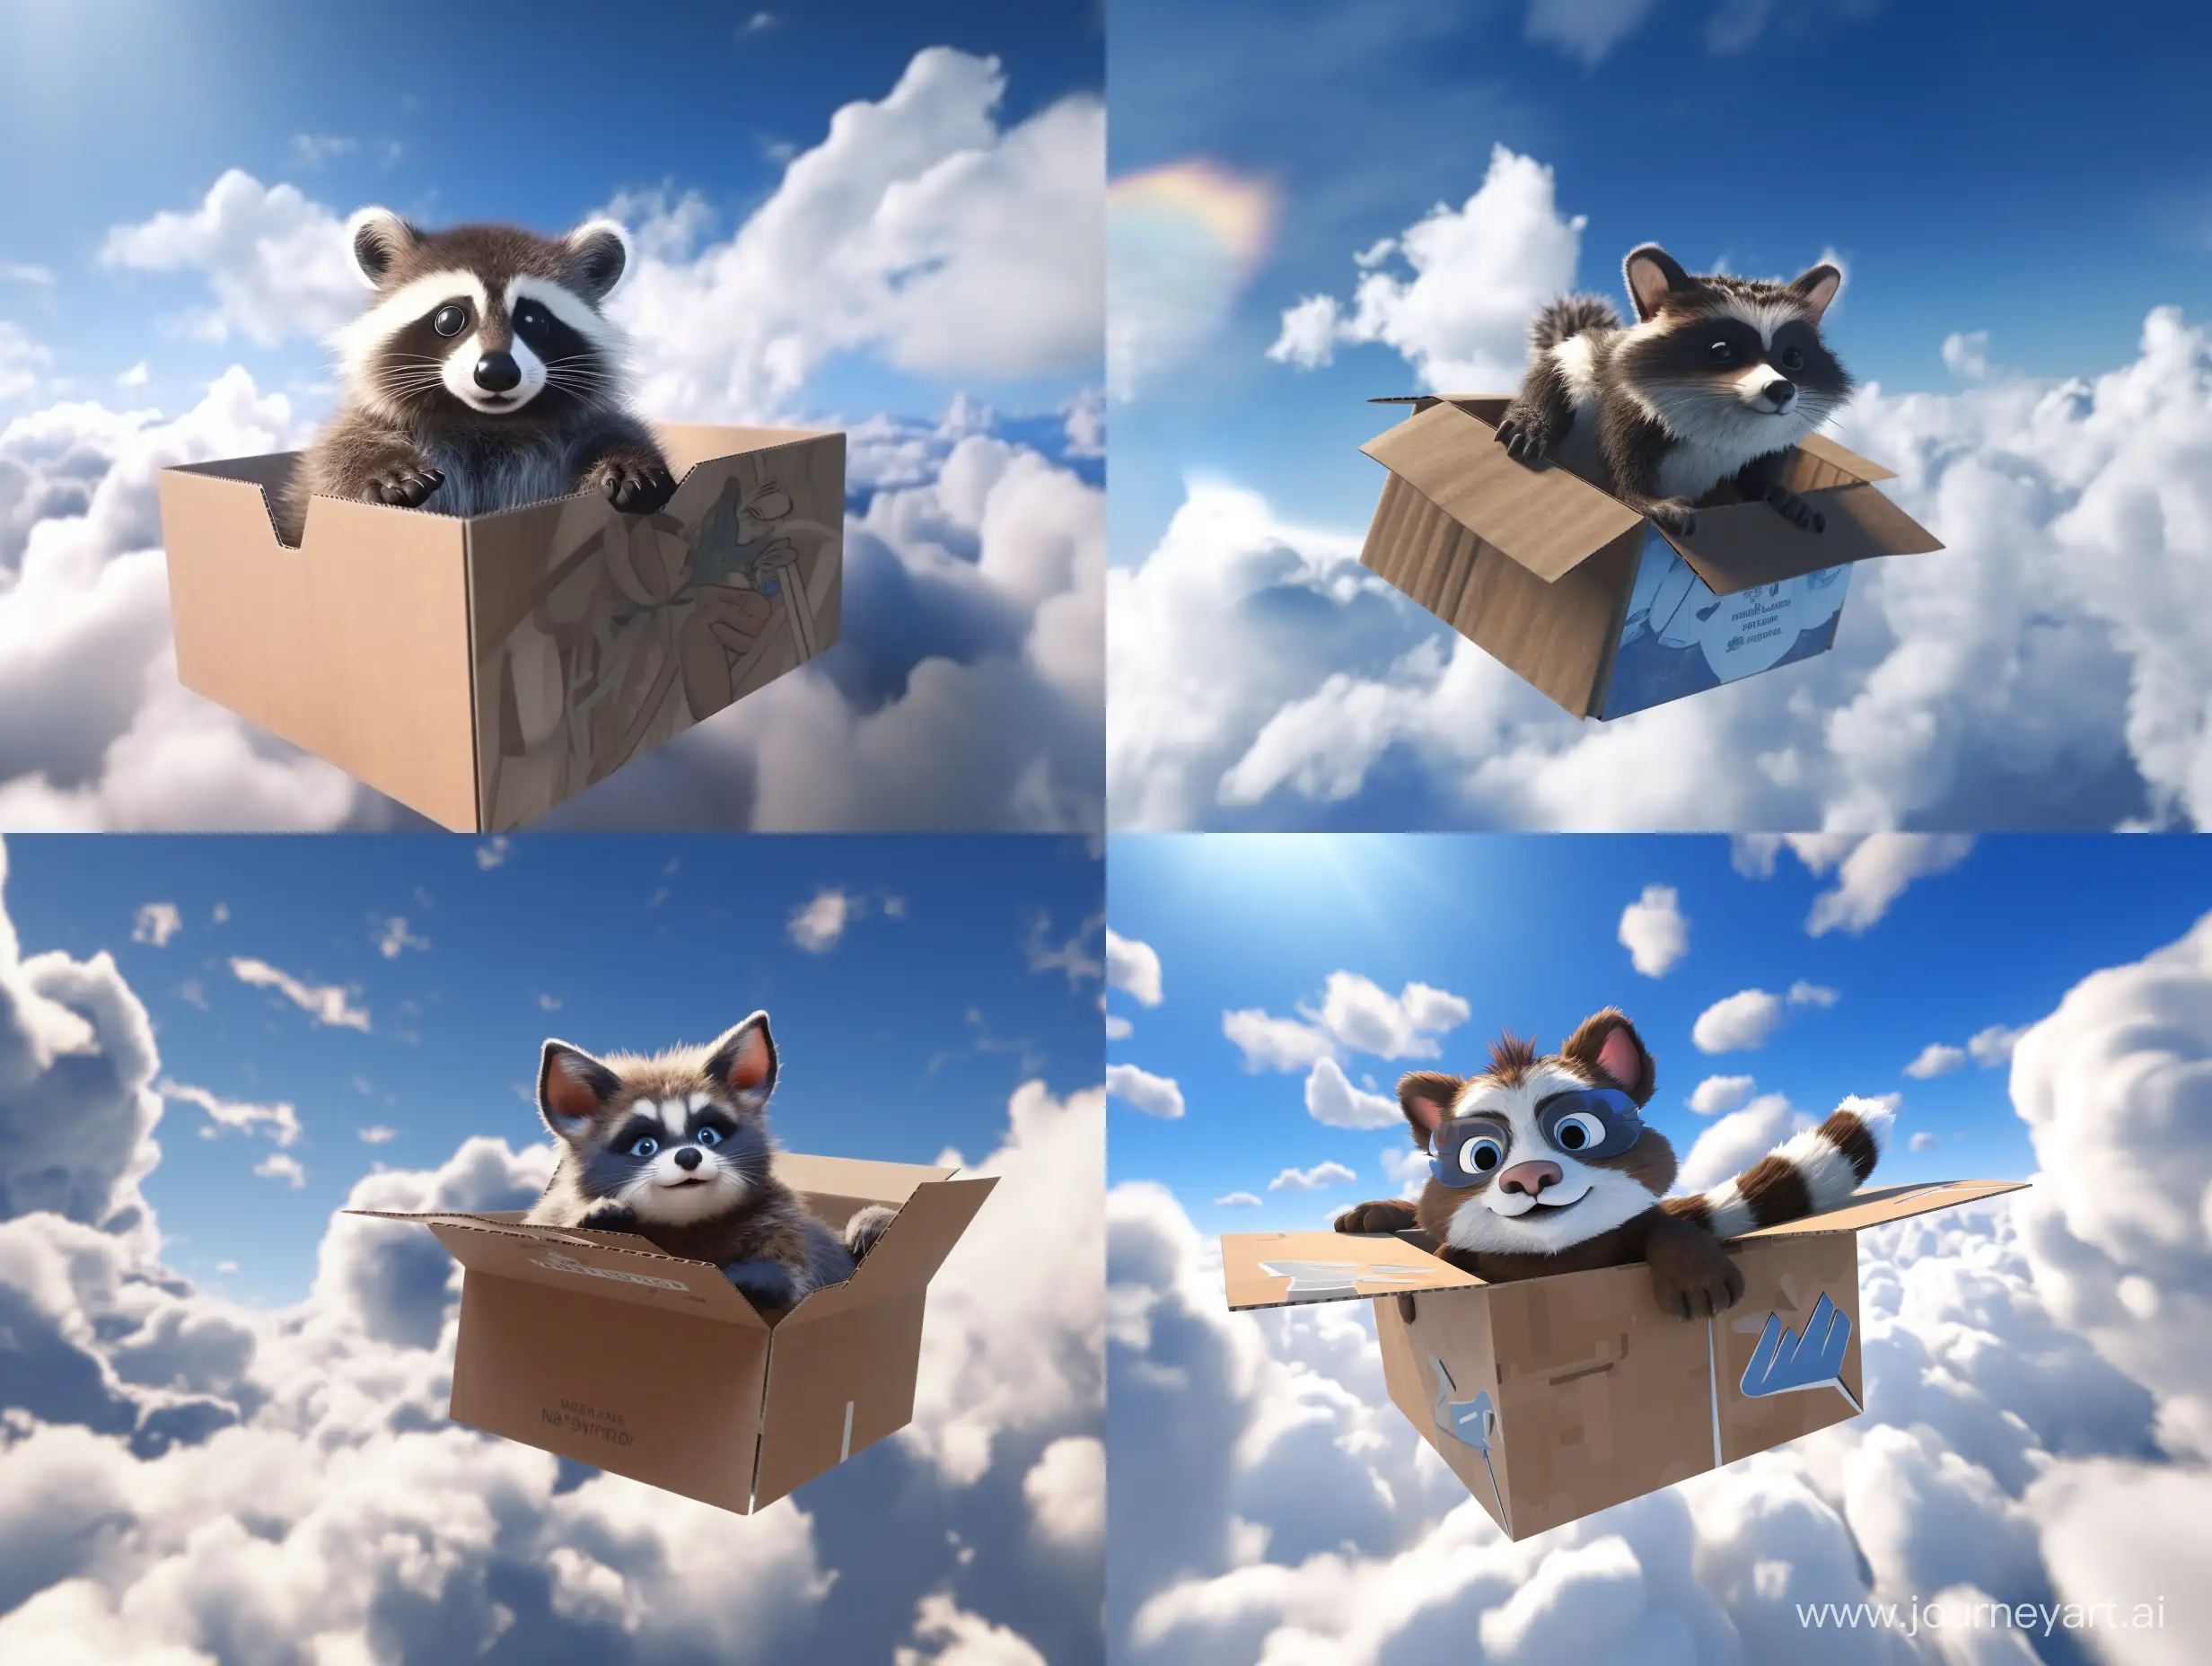 Adventurous-Raccoon-Soaring-Through-the-Clouds-in-a-HighPoly-Video-Game